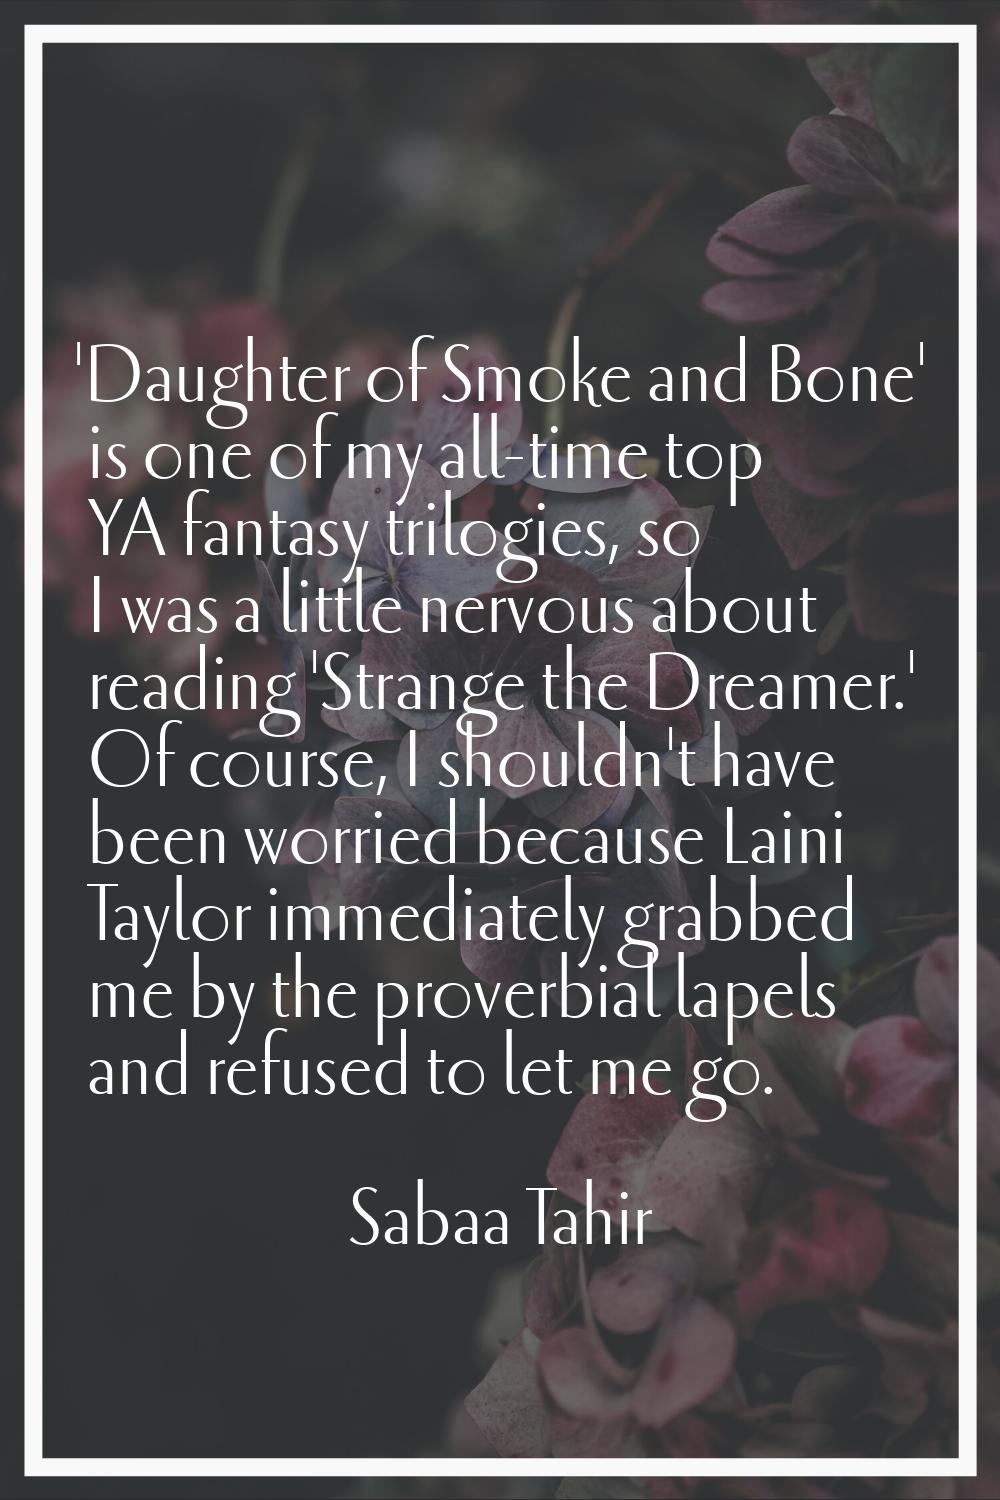 'Daughter of Smoke and Bone' is one of my all-time top YA fantasy trilogies, so I was a little nerv